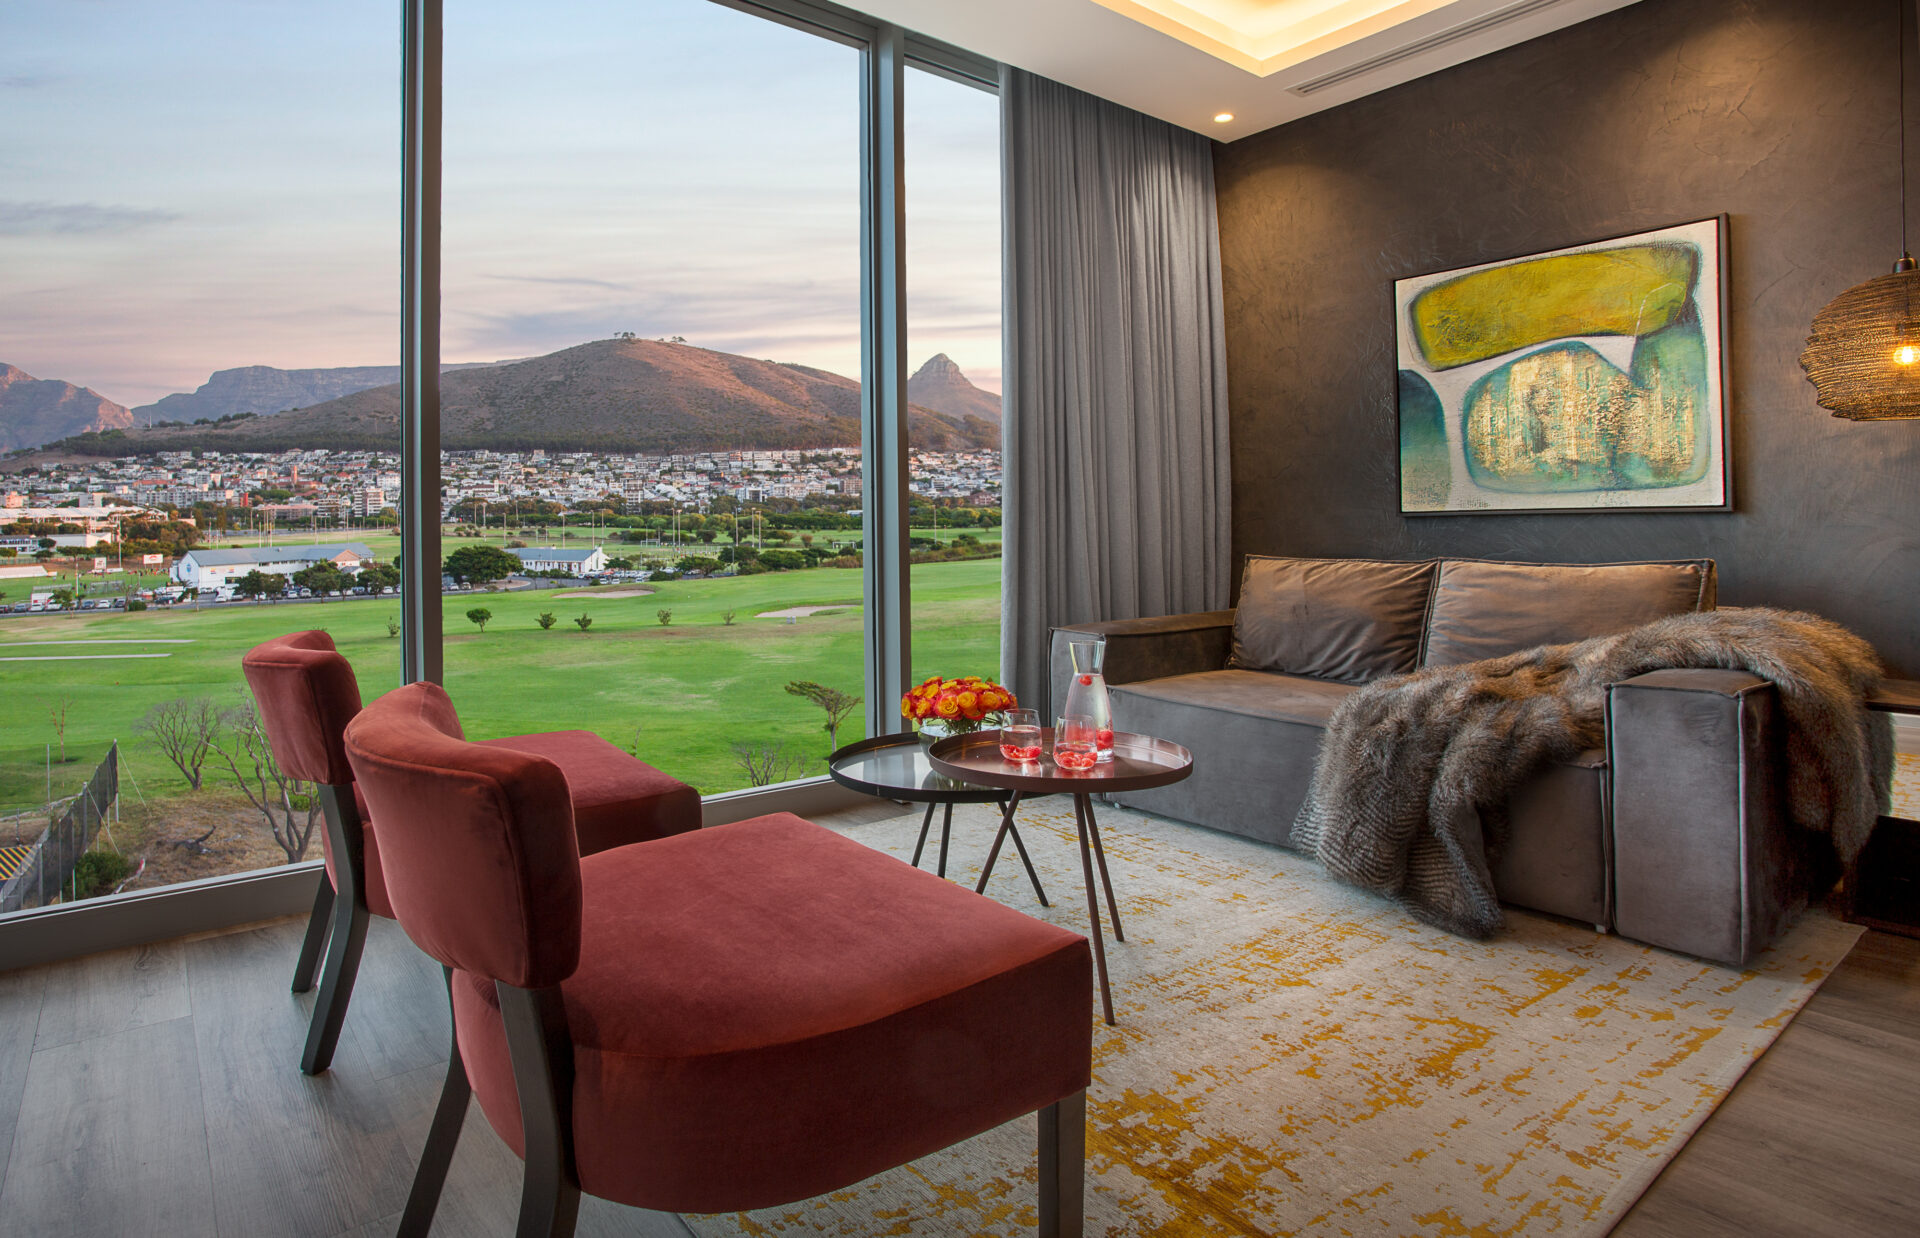 A luxurious lounge with floor to ceiling windows looking onto a golf course, residential buildings and mountains